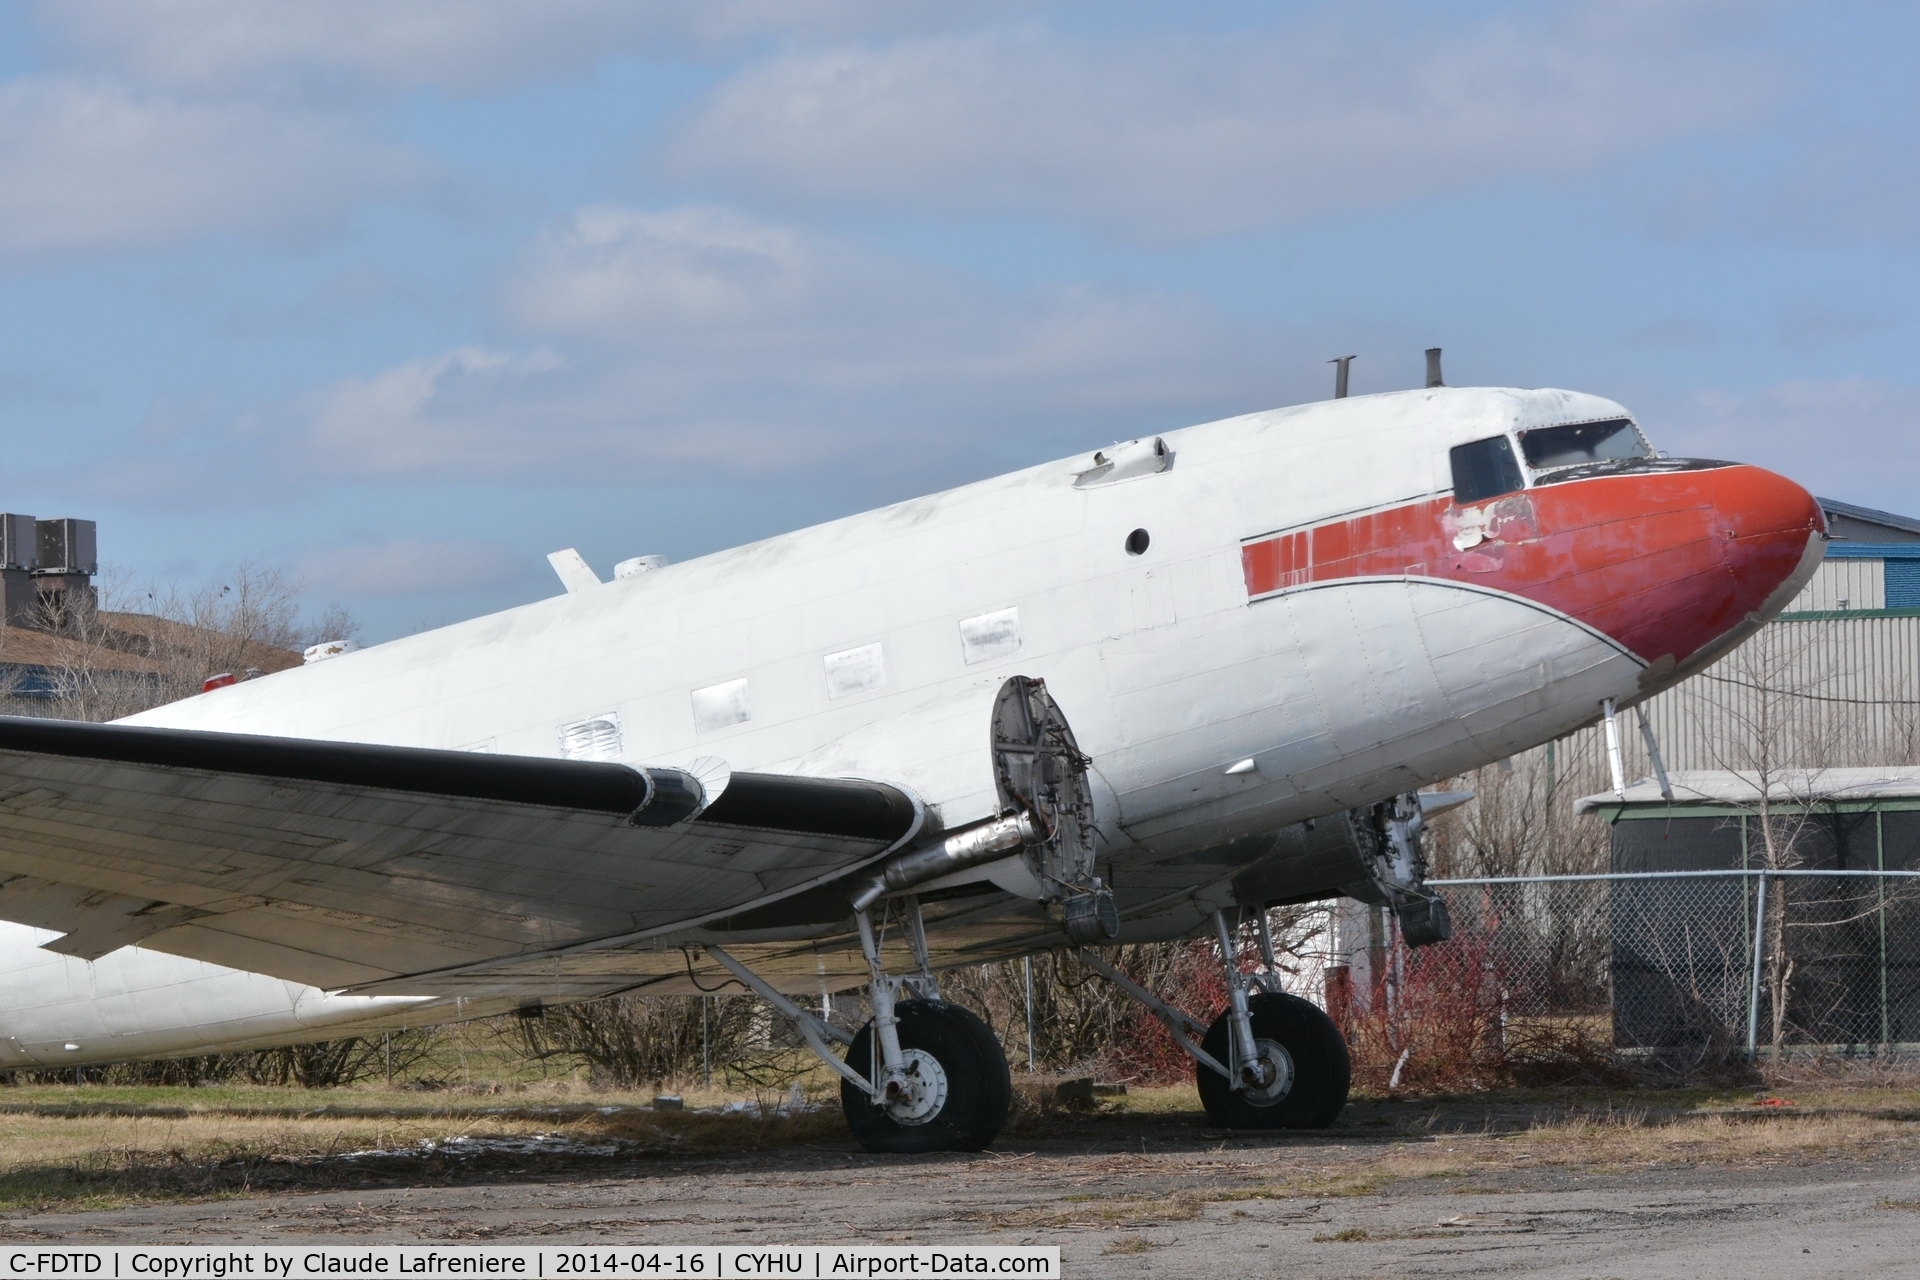 C-FDTD, 1944 Douglas C-47A-5-DK Skytrain C/N 12253, Was supposed to be  preserved part of the collection of the Air and Space Museum of Quebec (Fondation Aerovision Quebec) but he's abandoned in place since over 15 years engineless on the site of the Saint-Hubert airport.